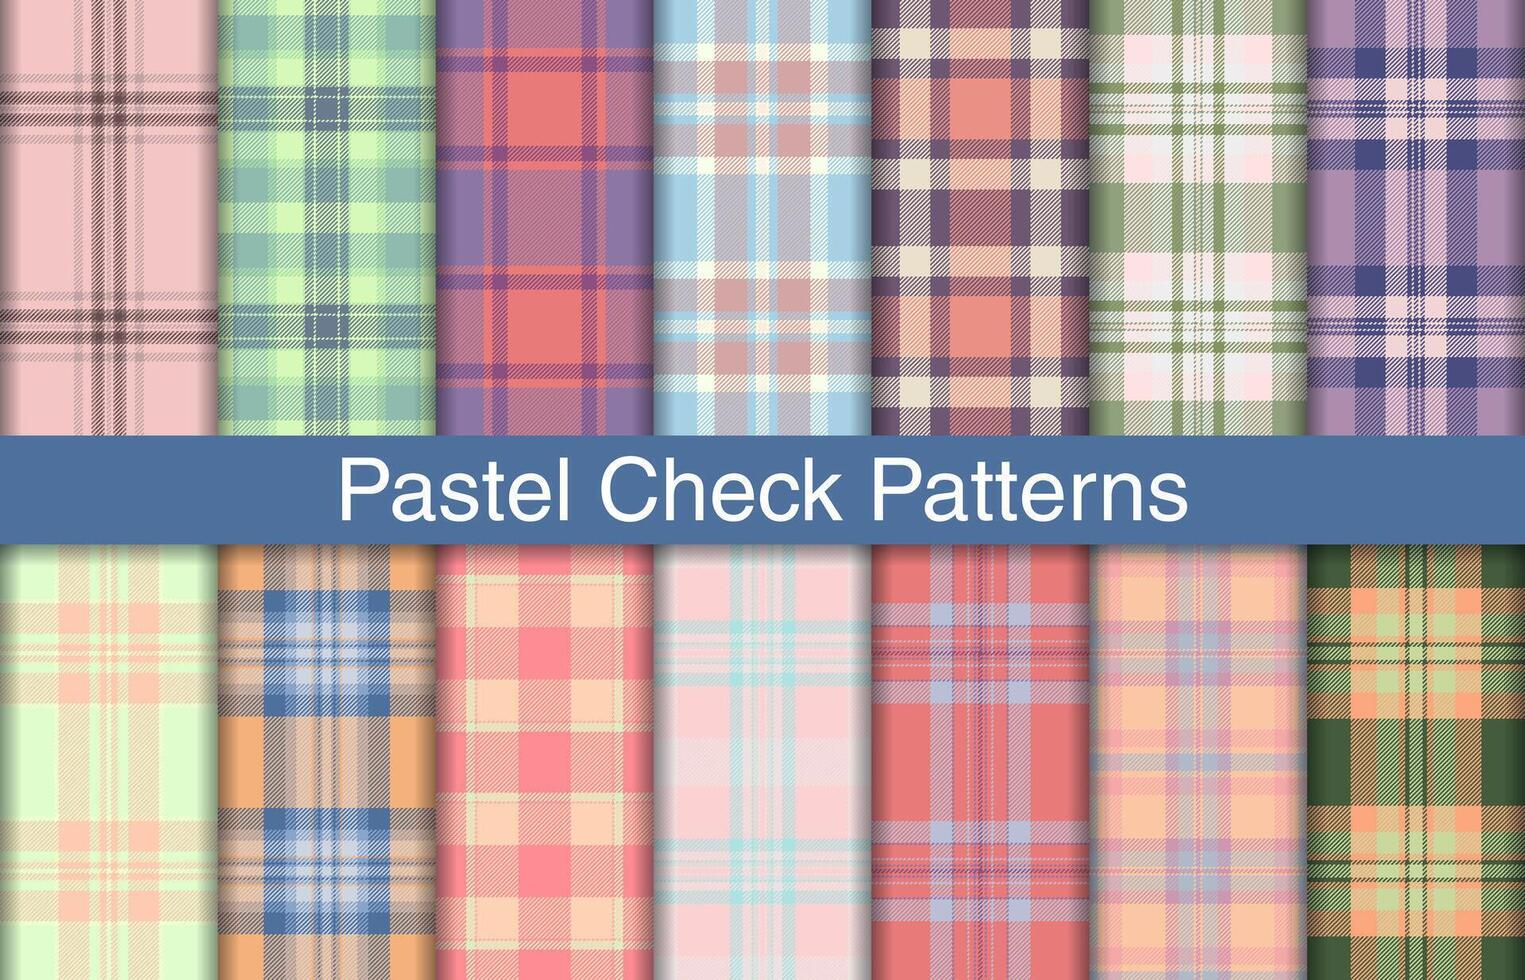 Pastel plaid bundles, textile design, checkered fabric pattern for shirt, dress, suit, wrapping paper print, invitation and gift card. vector